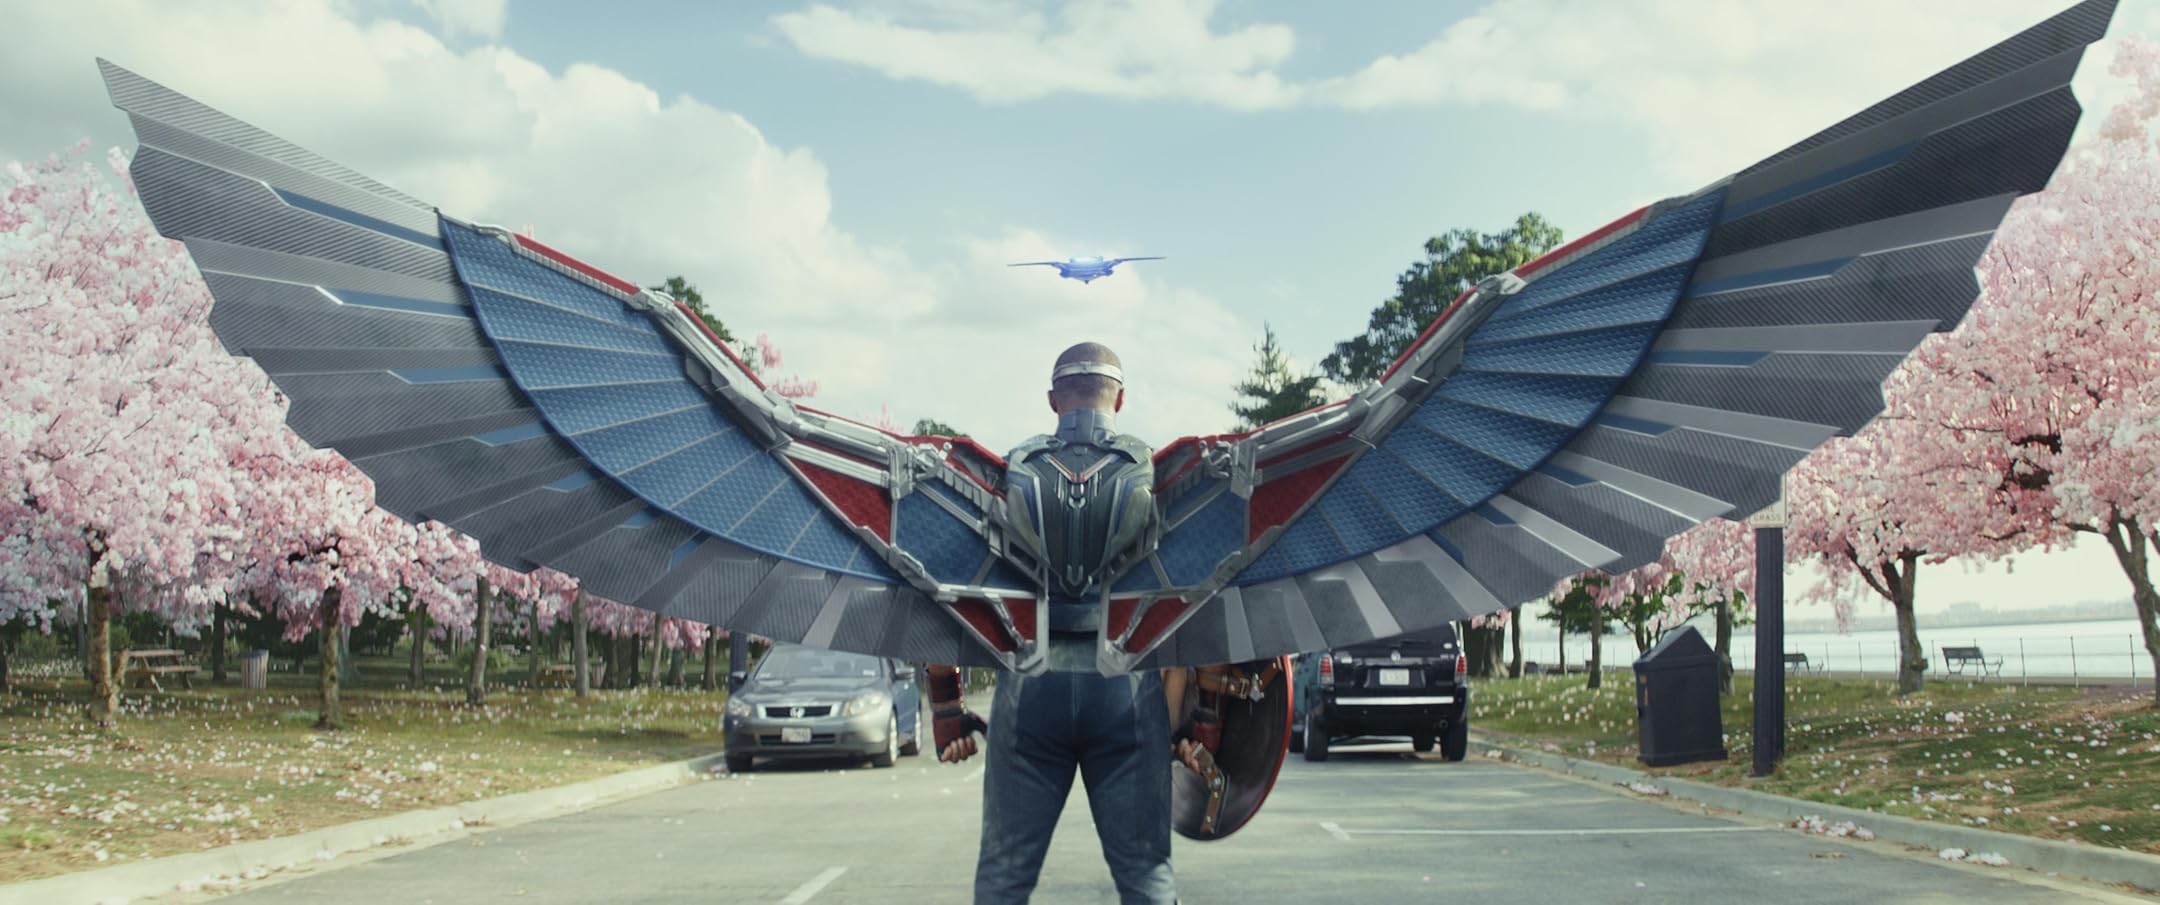 Sam Wilson/Captain America extends his Falcon flight suit wings as he prepares to pursue a jet in a still from the Captain America: Brave New World teaser trailer